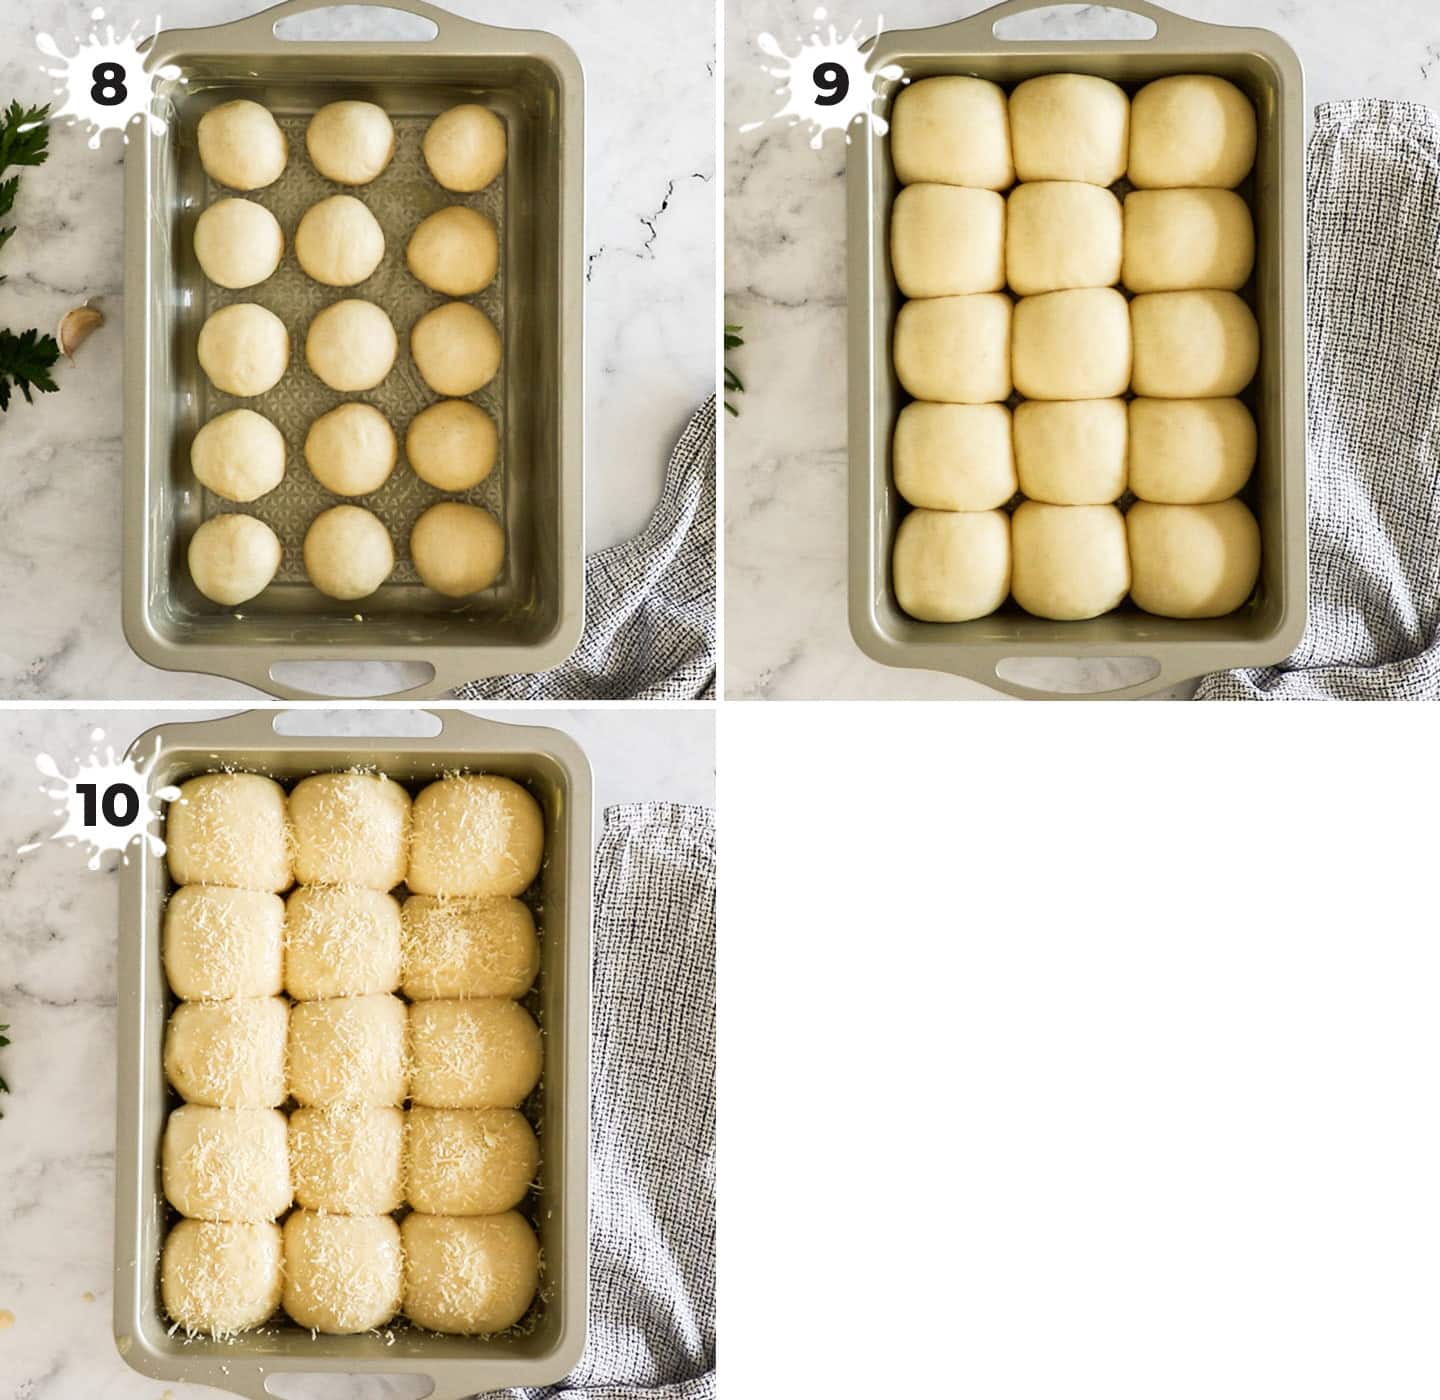 The rolls rising in a pan before baking.